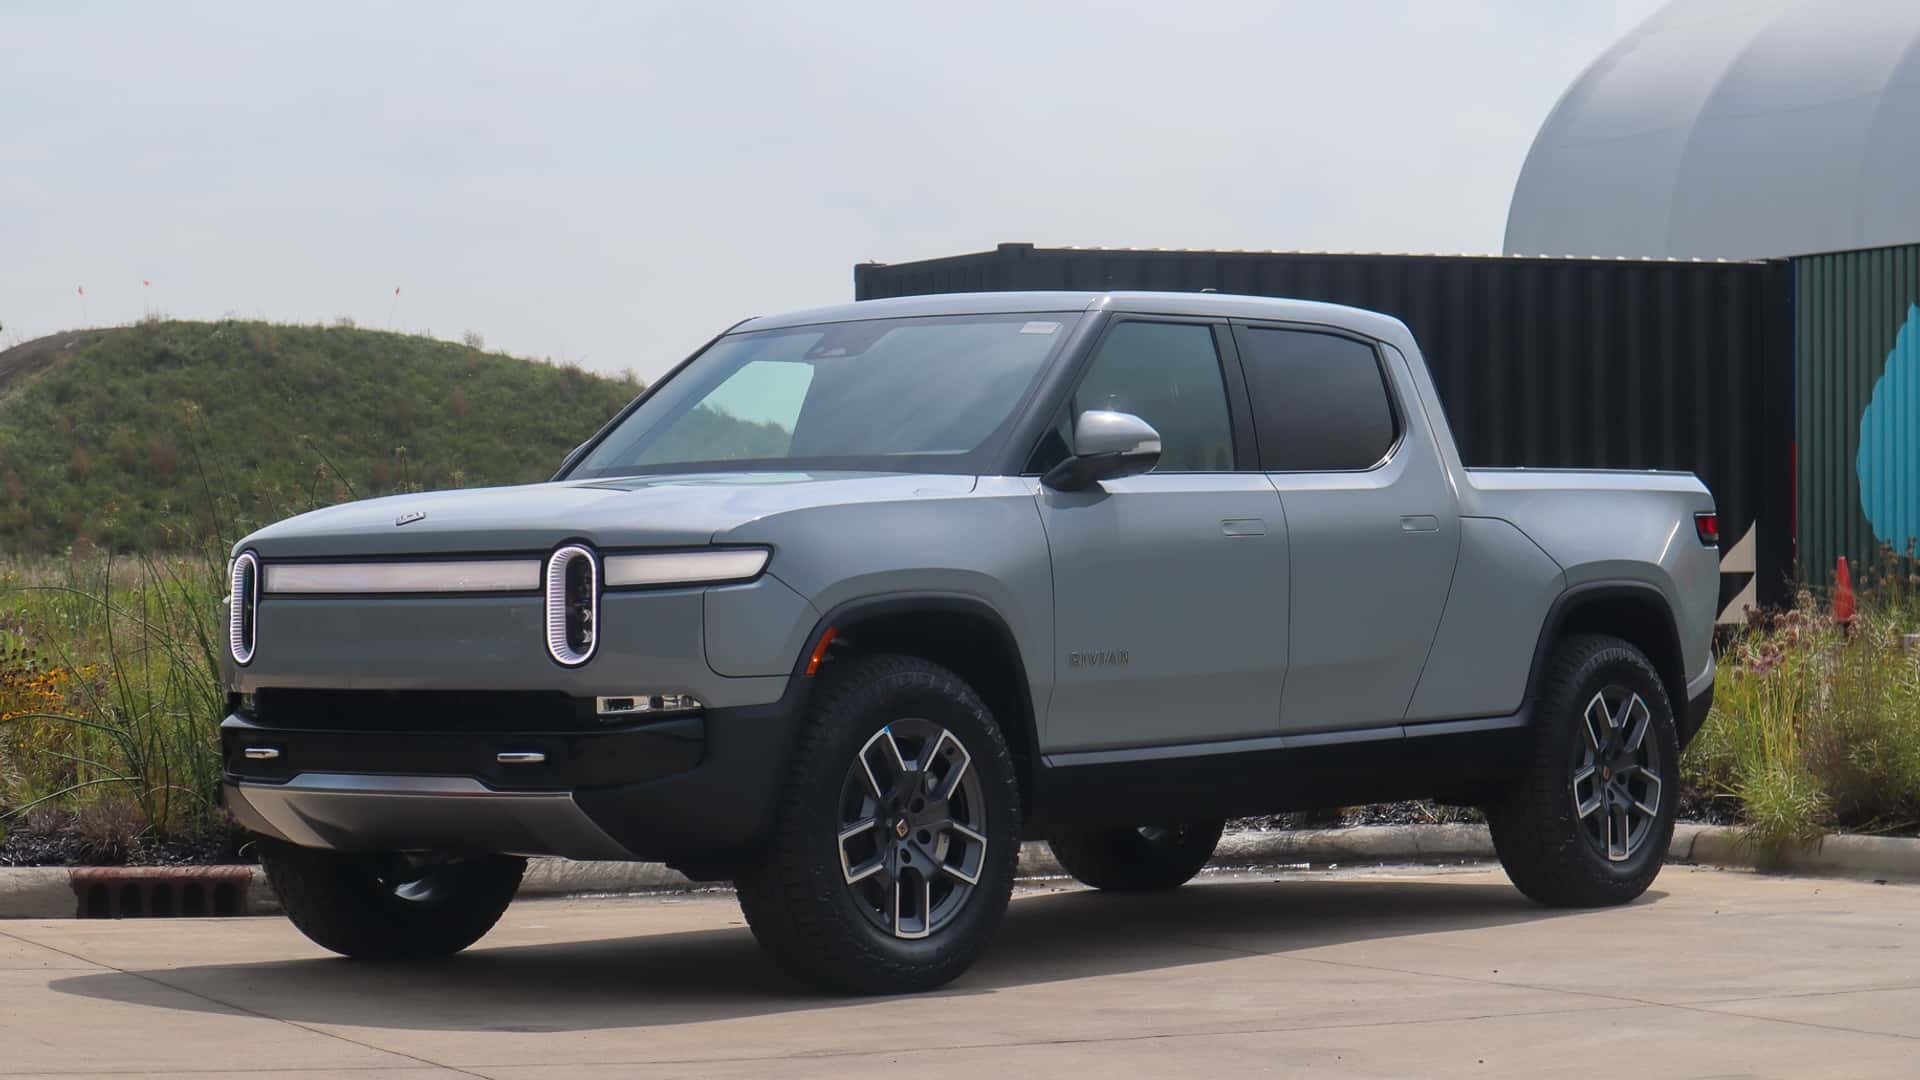 rivian ceo hints at leasing options that will unlock $7,500 tax credit